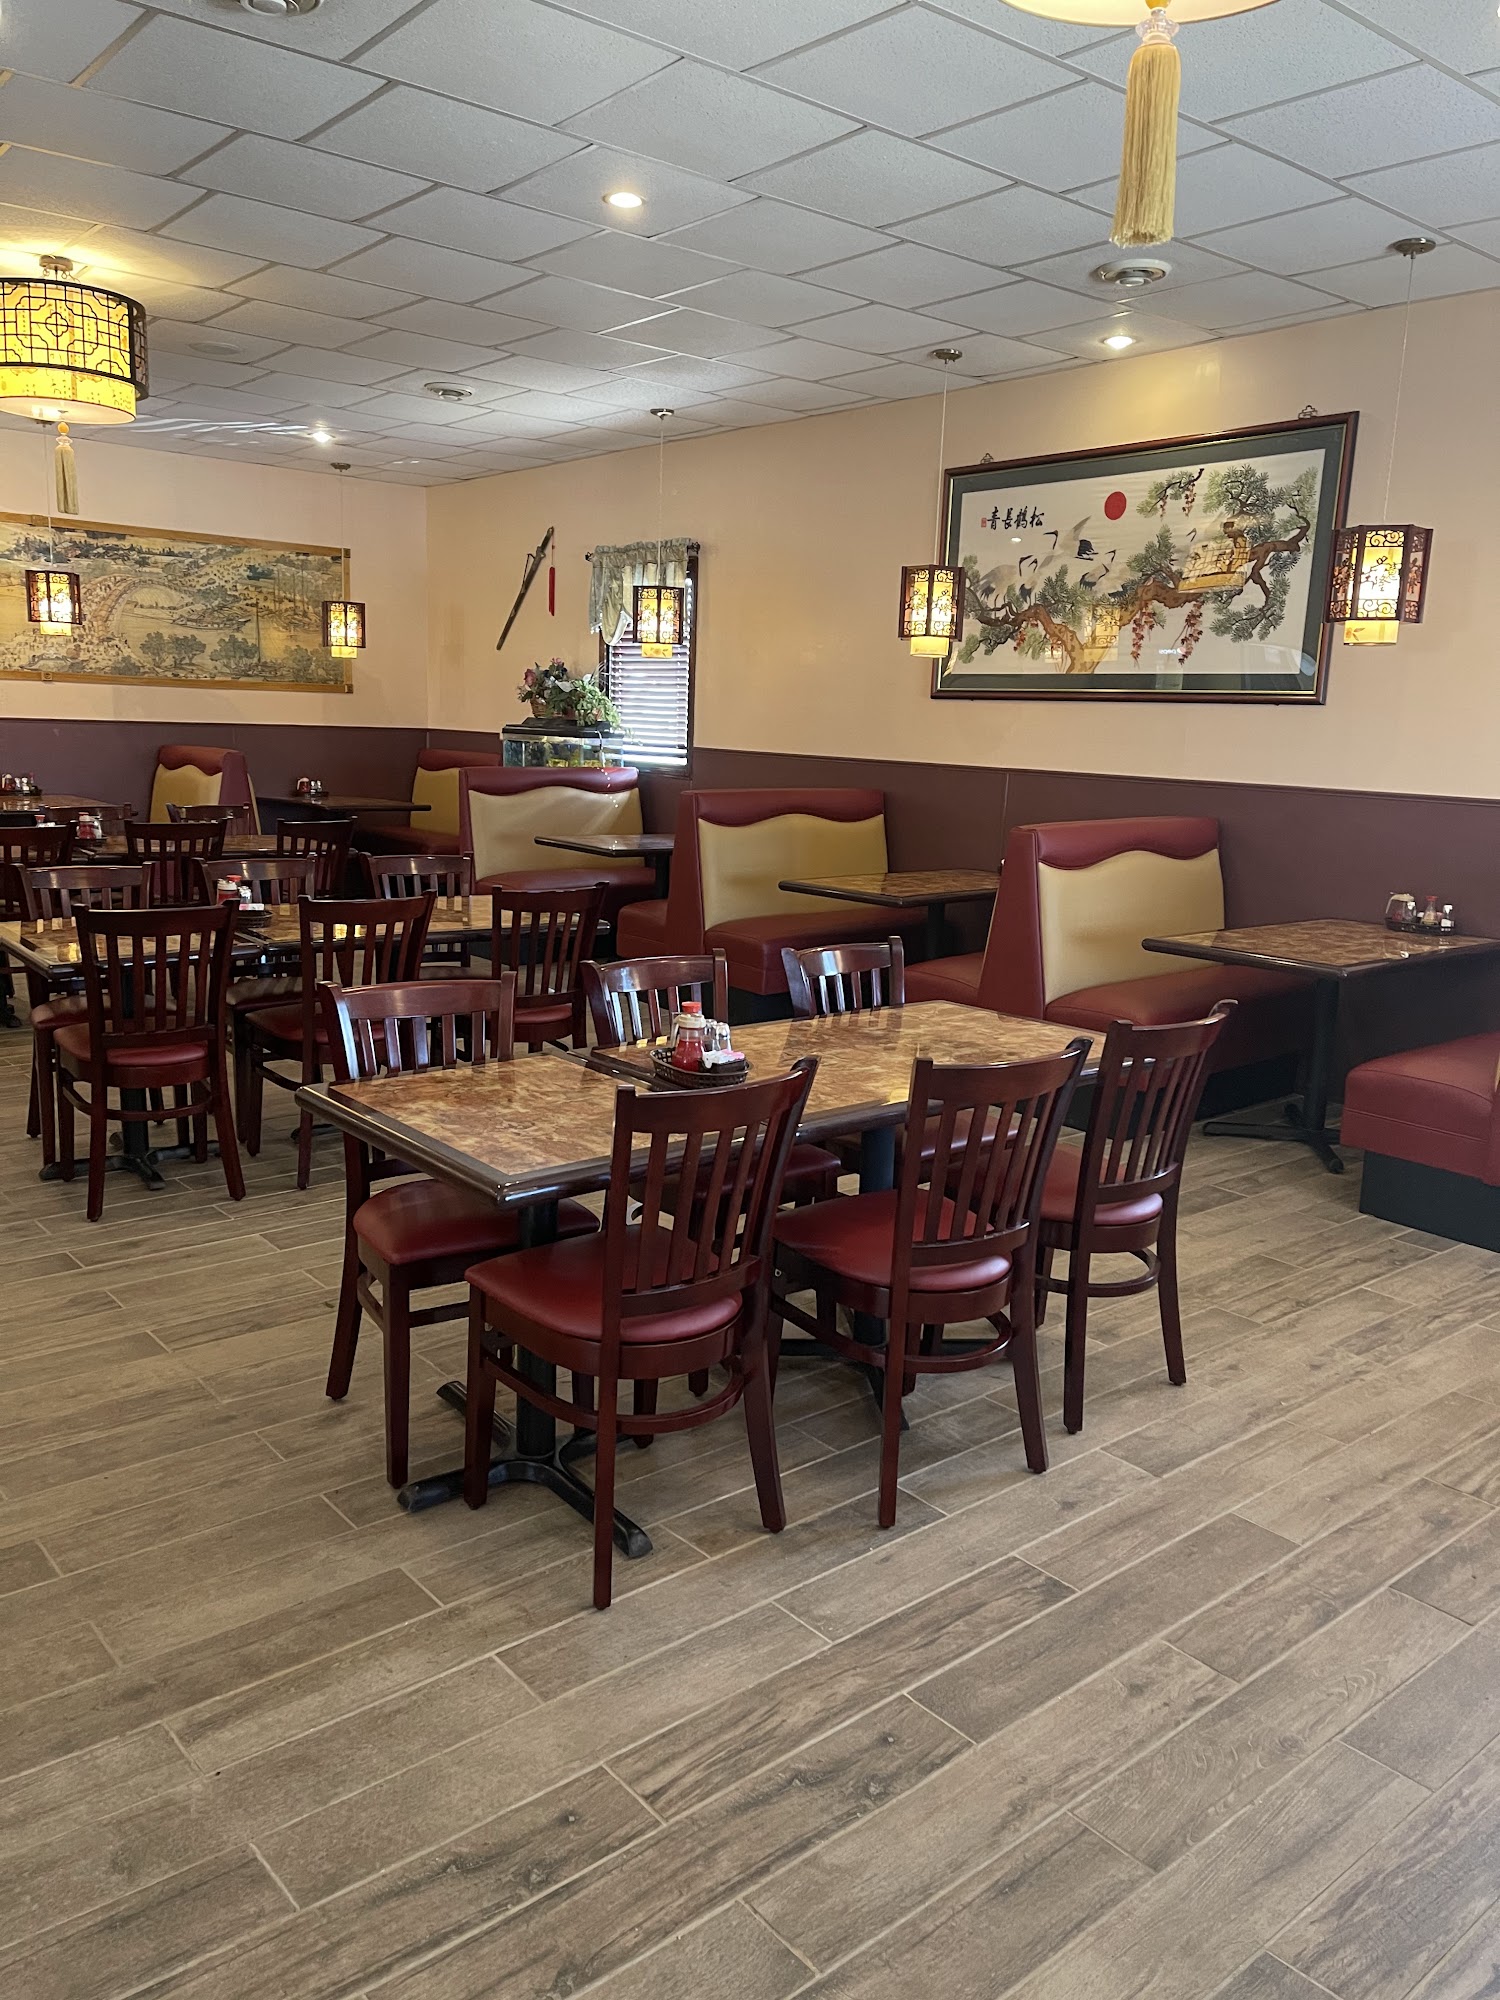 A9 Chinese Restaurant 101 Grandview Dr, Toledo, IA 52342